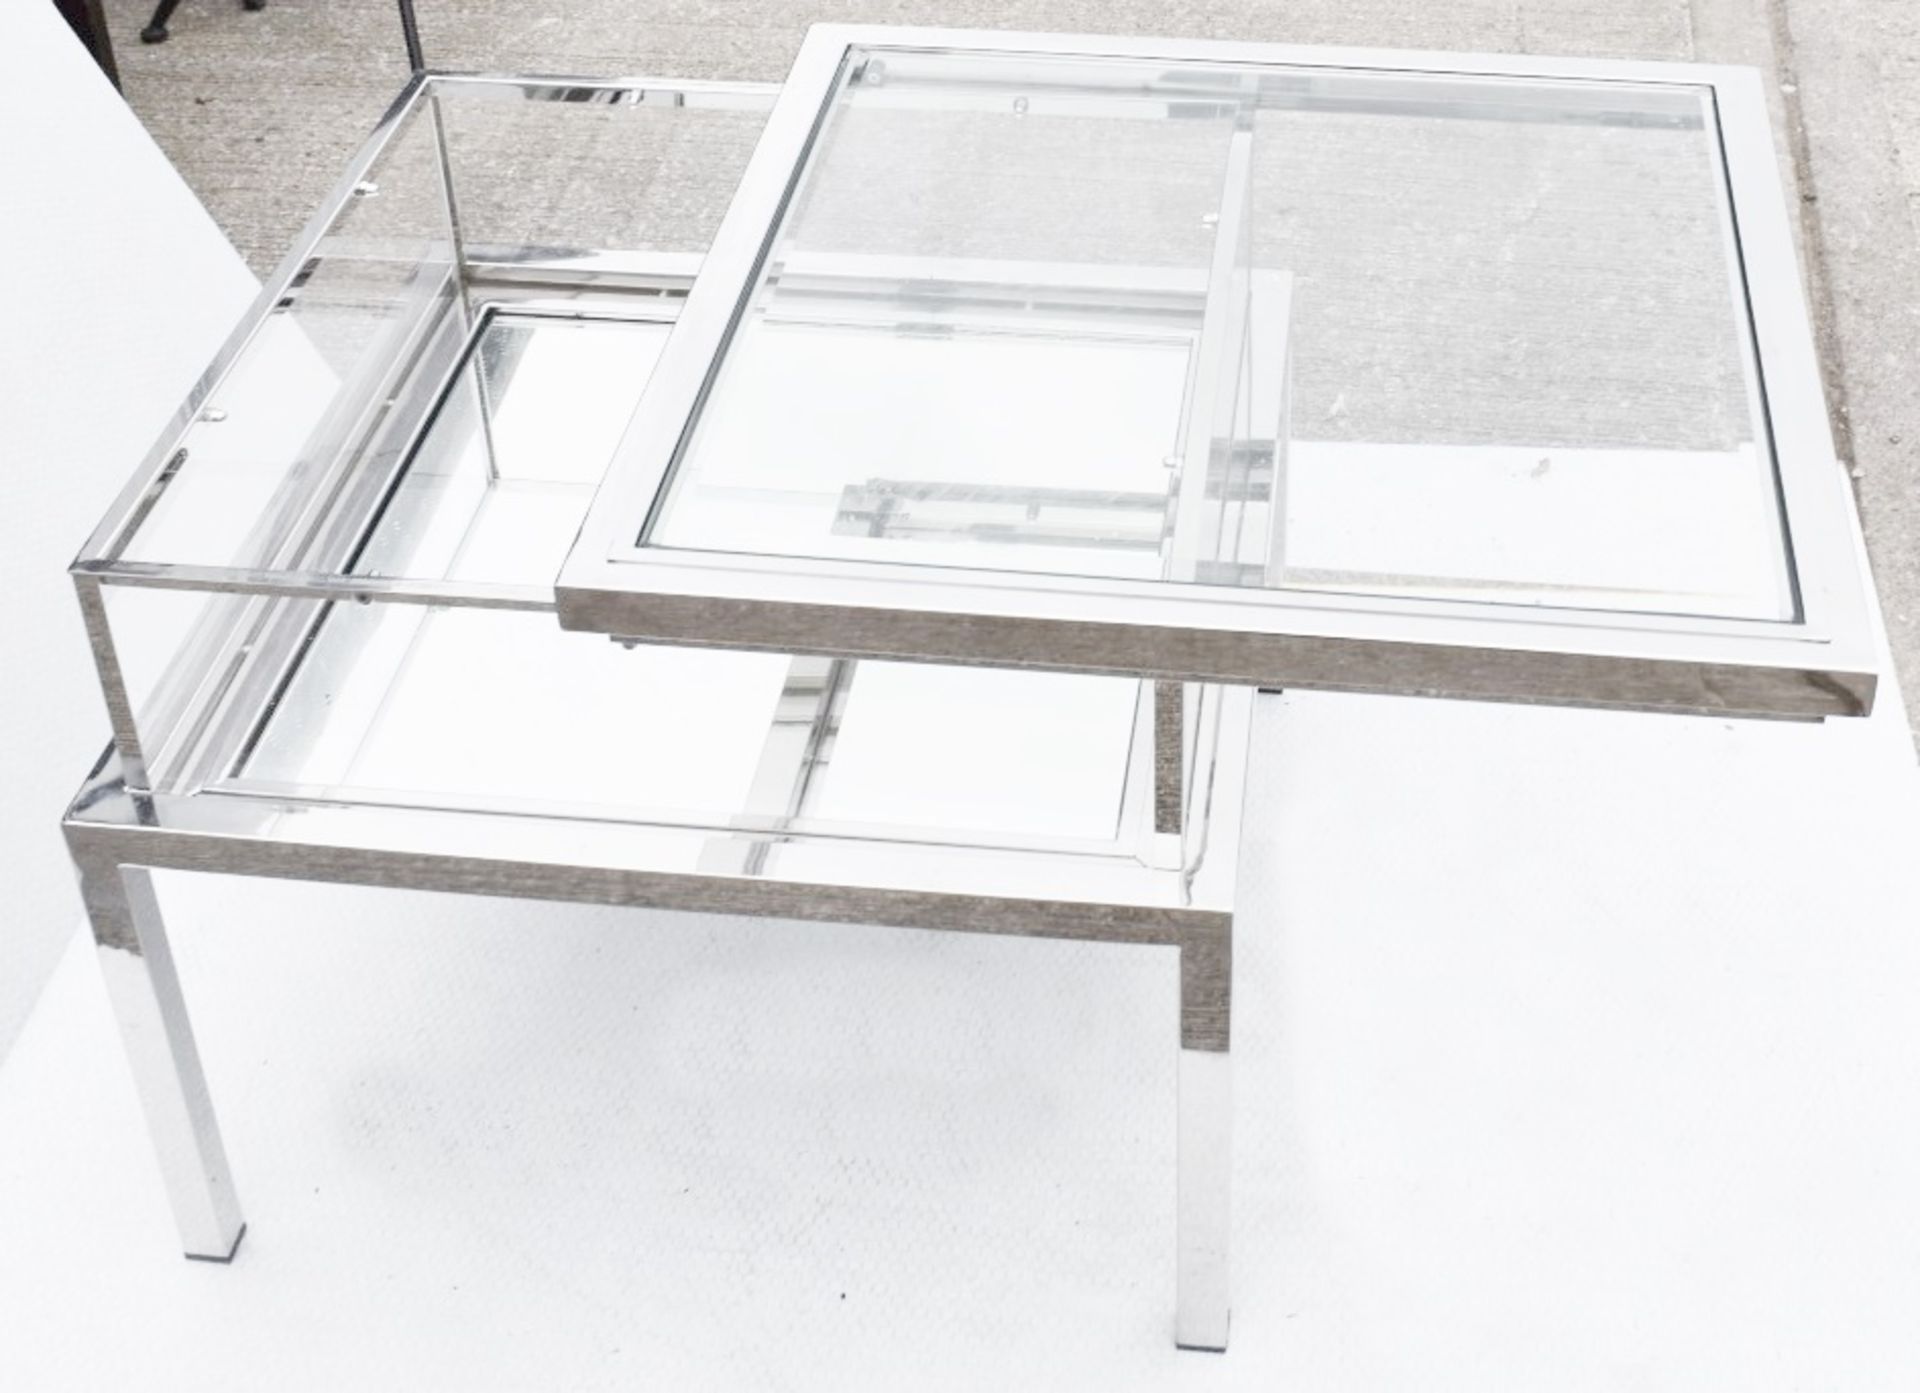 1 x EICHHOLTZ Glass Topped Side Table Harvey With A Polished Steel Frame - Image 2 of 5